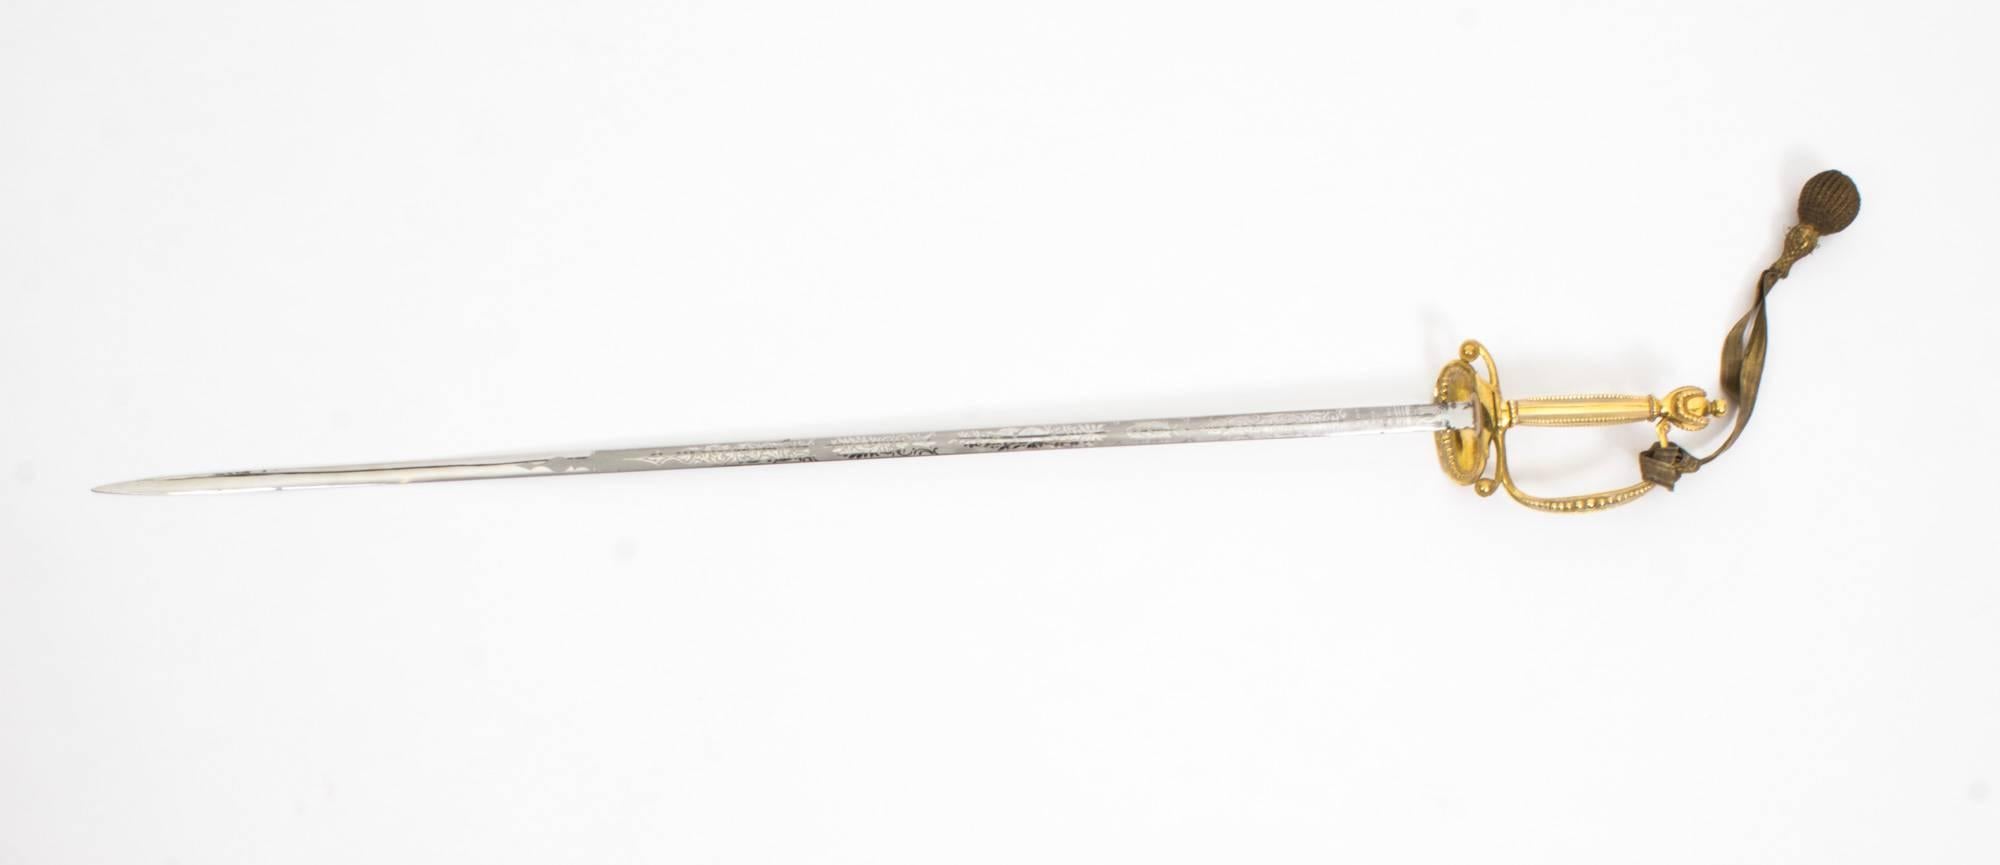 A superb Rapier by McCallan, St James Street, London, late 19 century in date.

It features a gilt bronze hilt with a gilt bronze mounted leather scabbard.

The engraved blade is double edged and it comes with it's original gold thread work